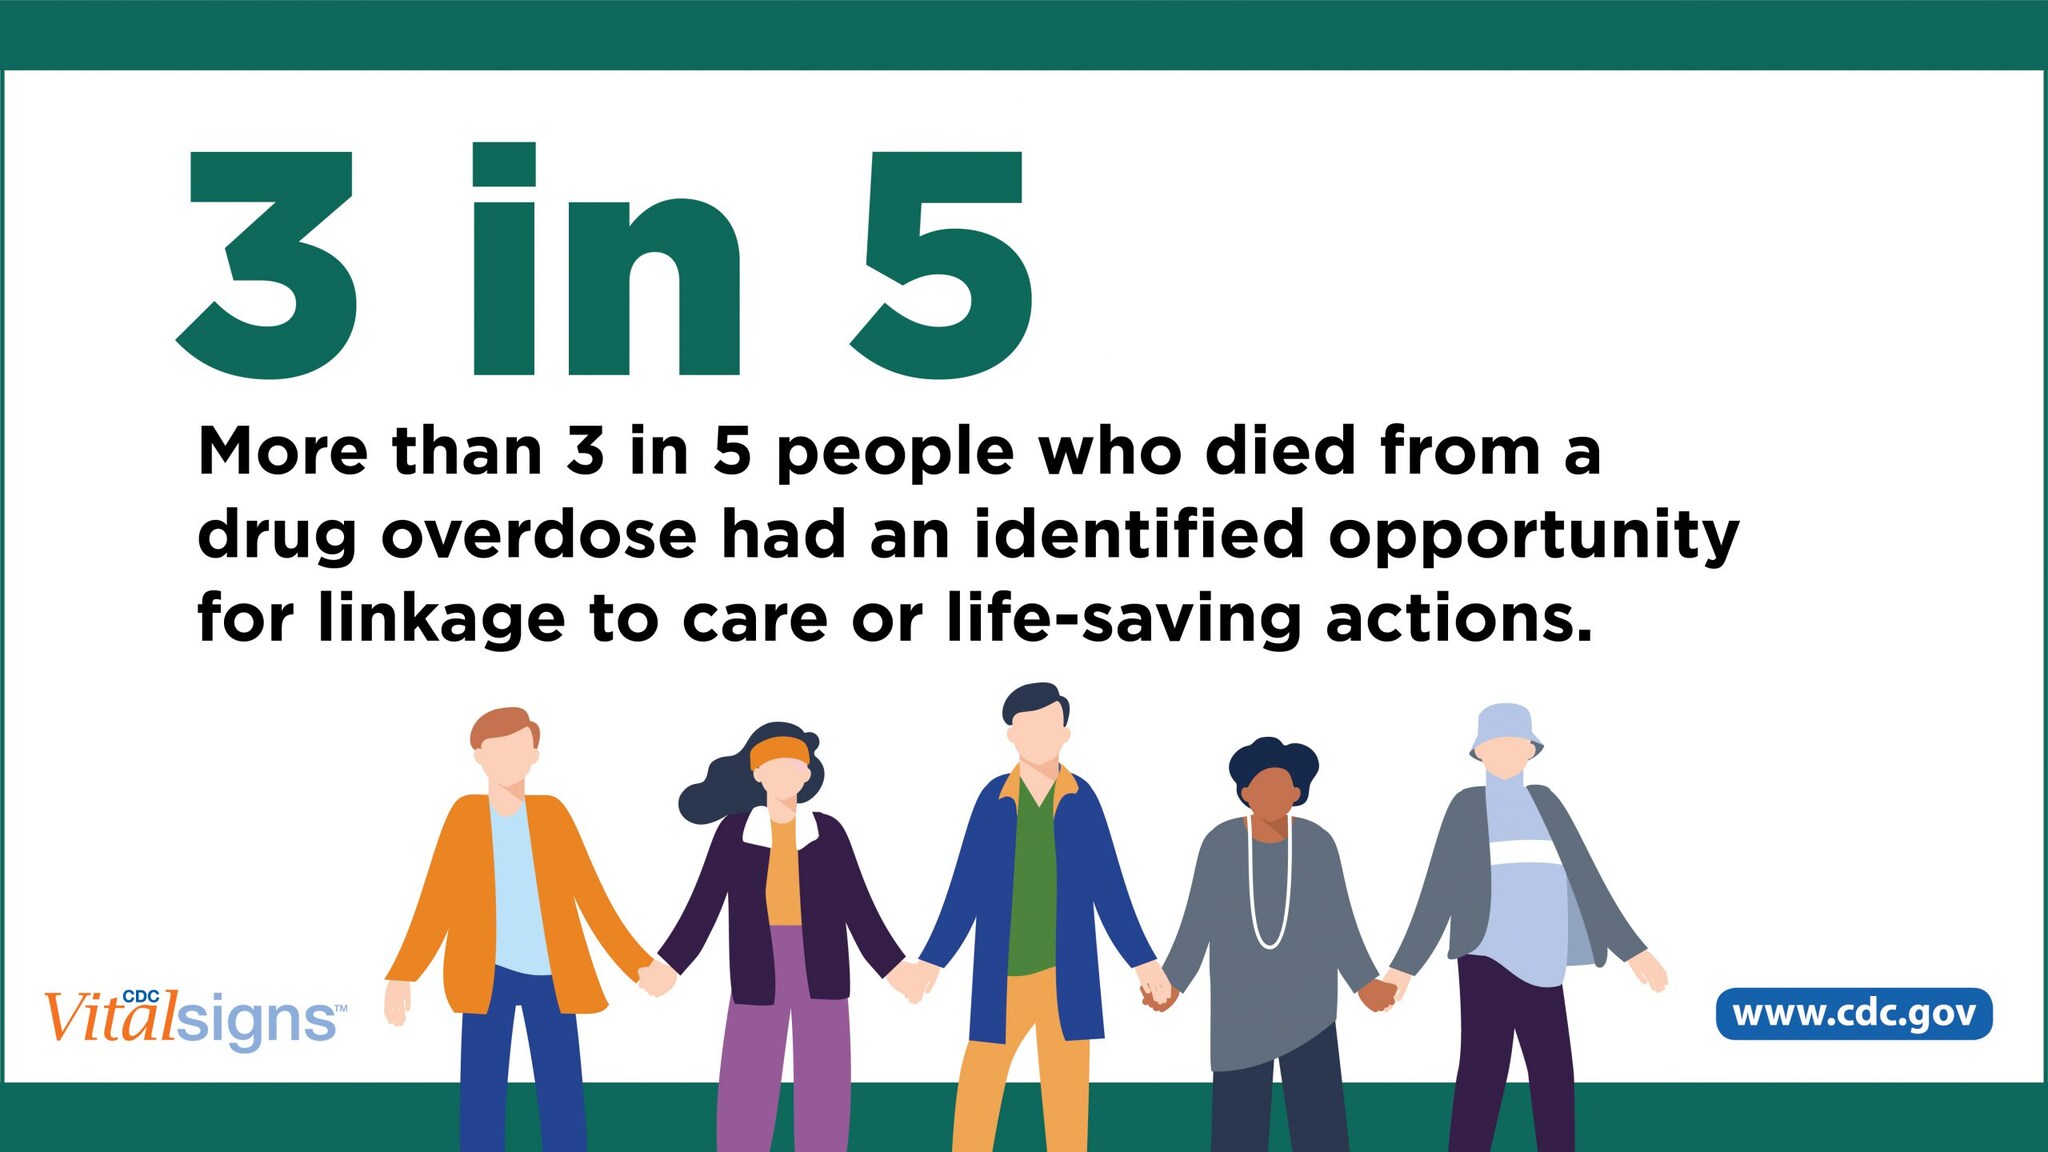 More than 3 in 5 people who died from a drug overdose had an identified opportunity for linkage to care of life-saving actions.